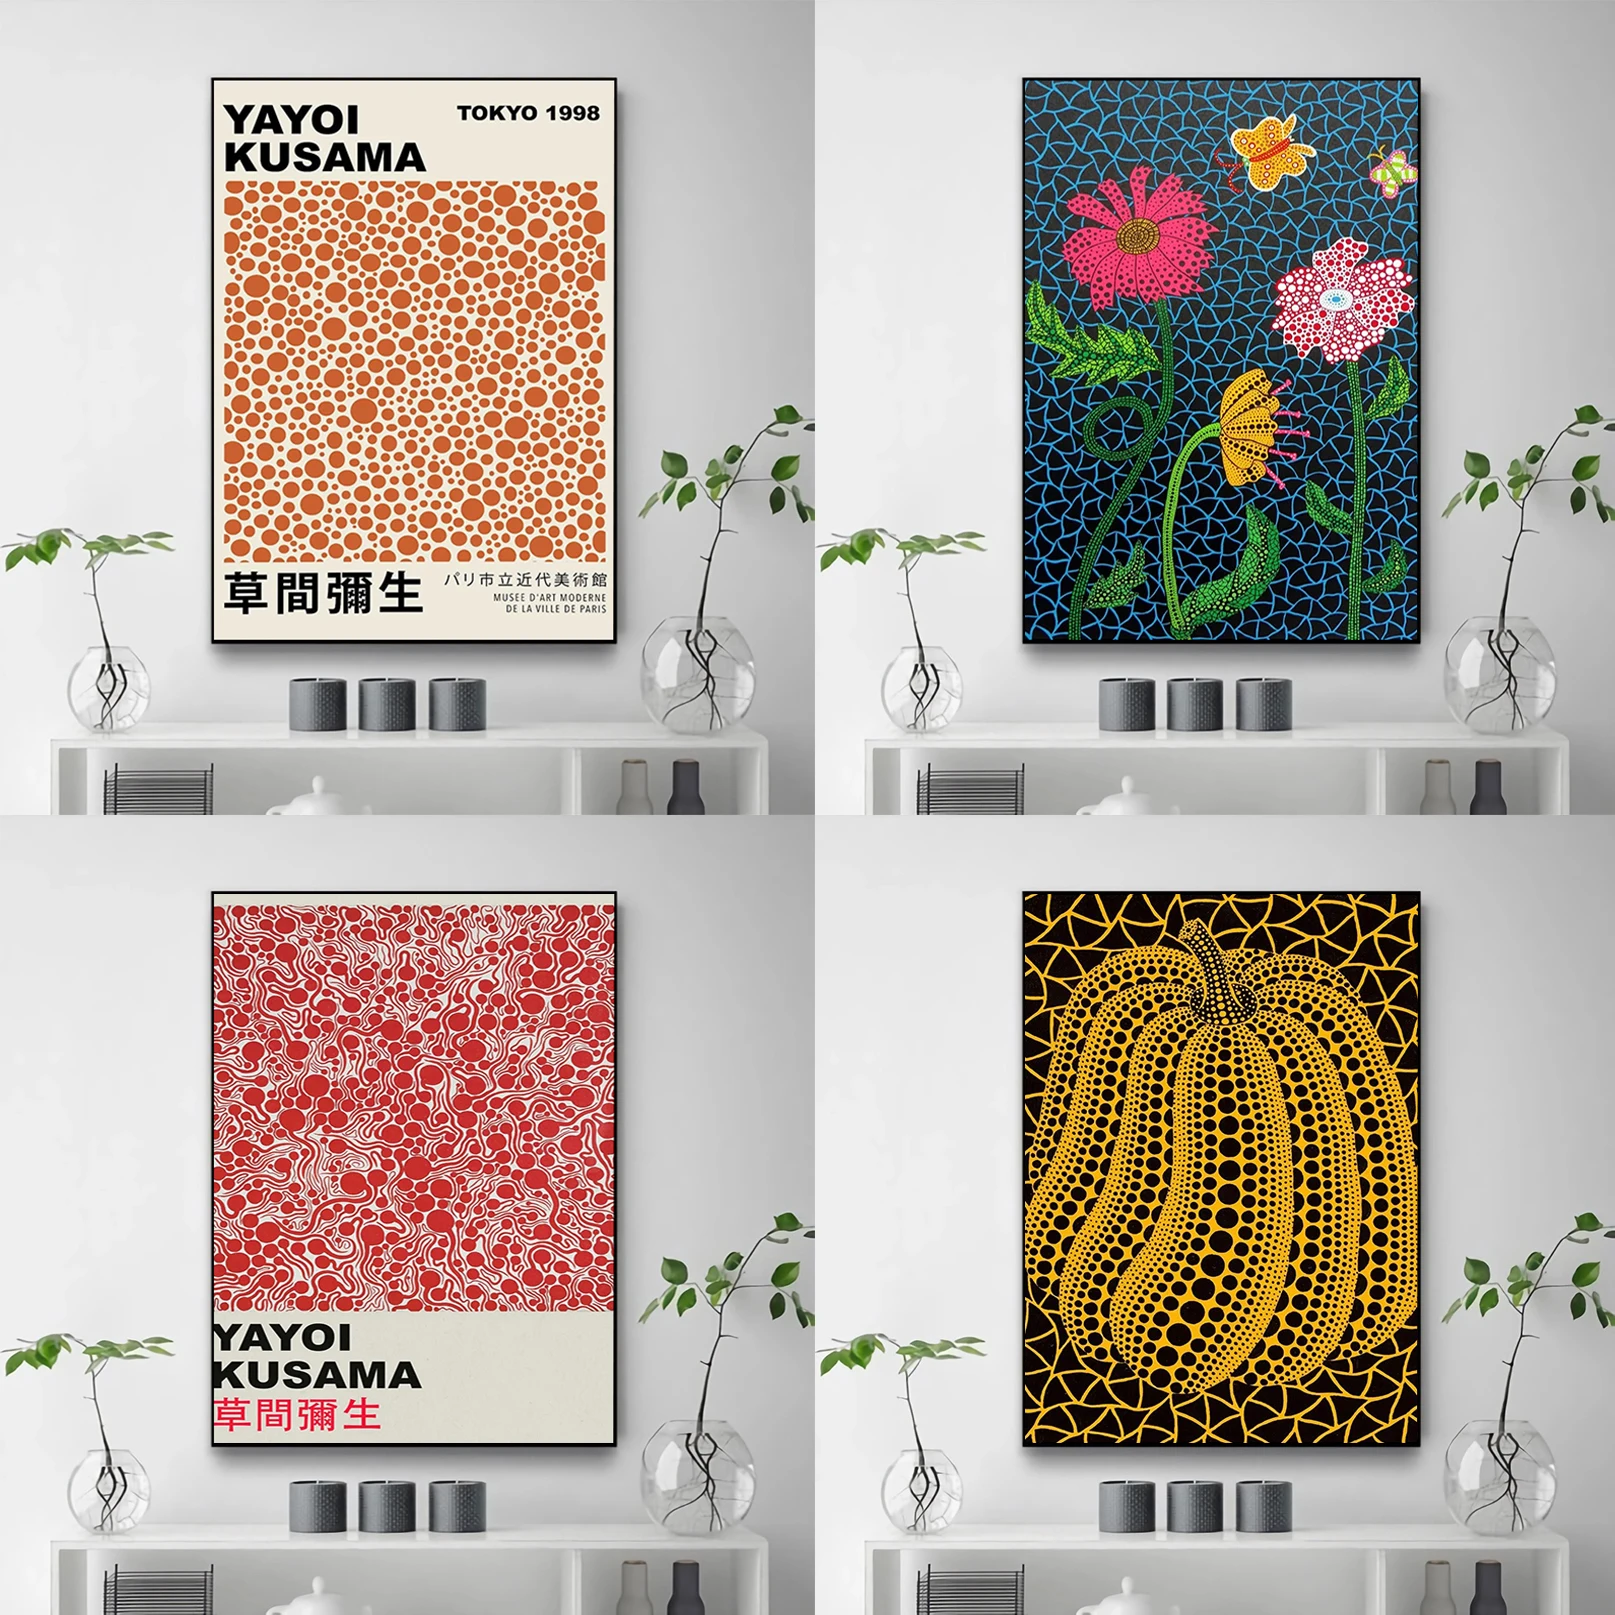 

Posters for Wall Art Yayoi Kusama Exhibition Poster Canvas Home Decore With Free Shipping Room Decor Decorative Painting Prints